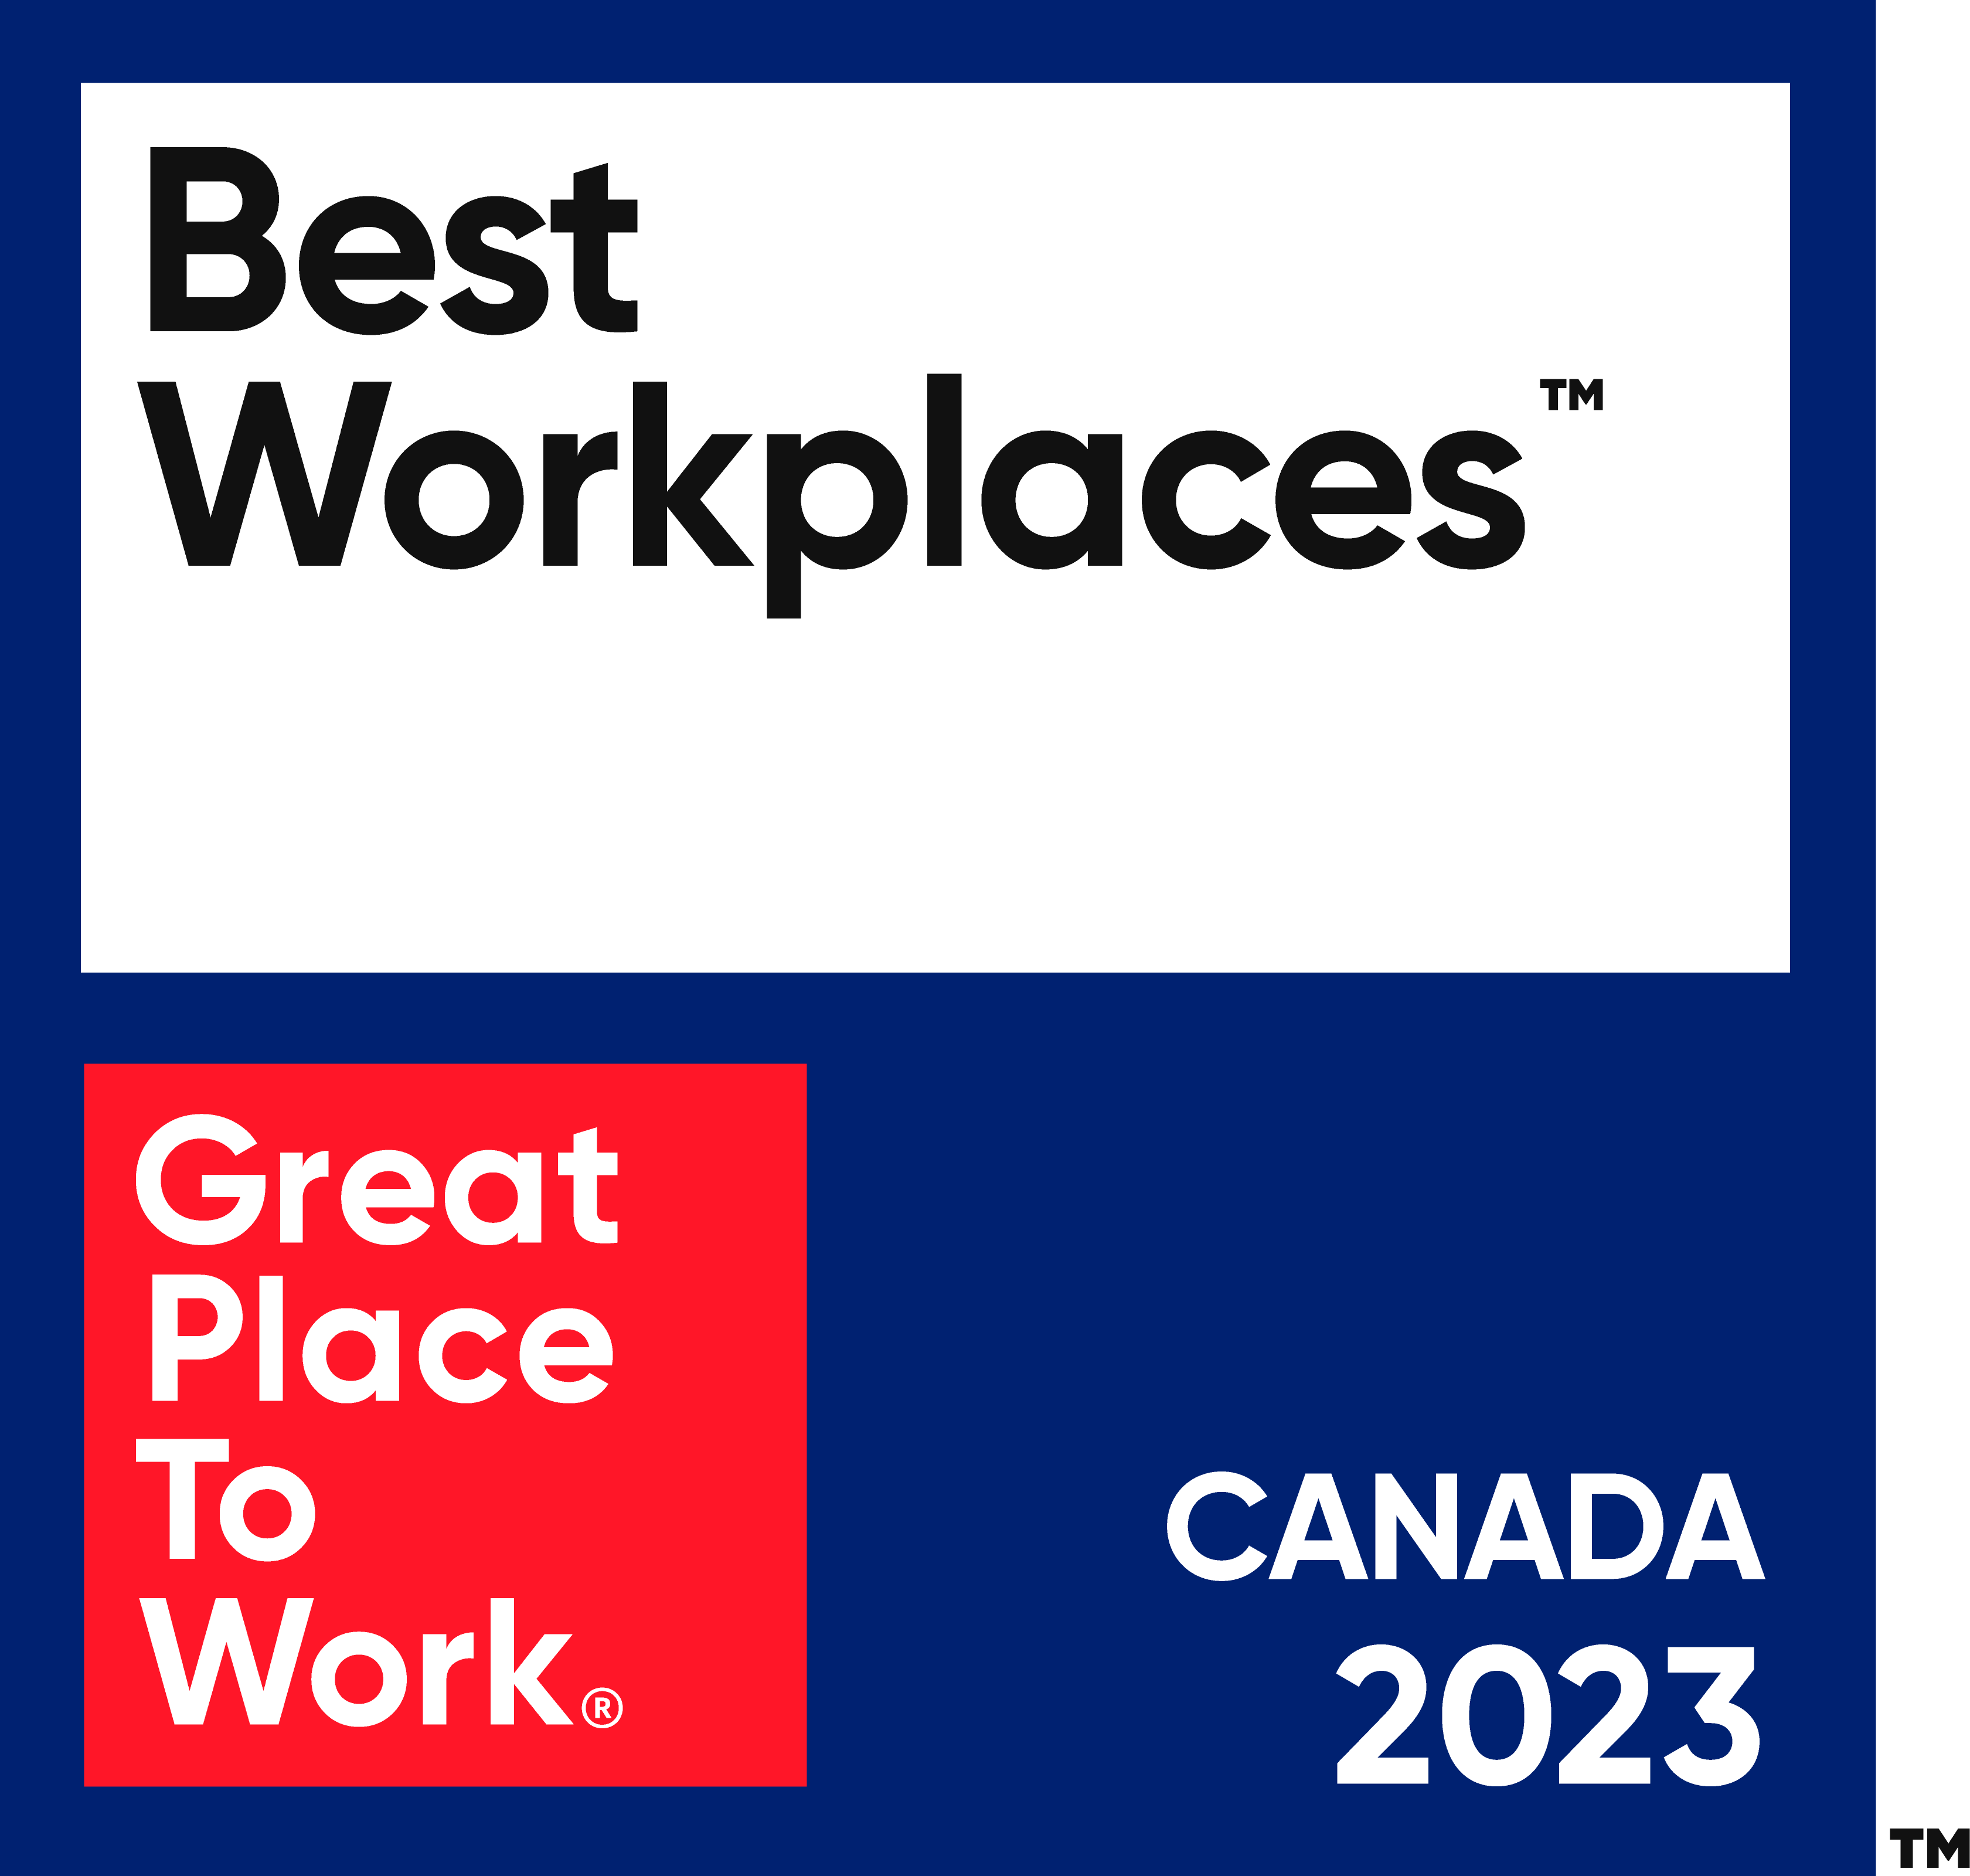 Best Workplaces. Great Place To Work. Canada 2023